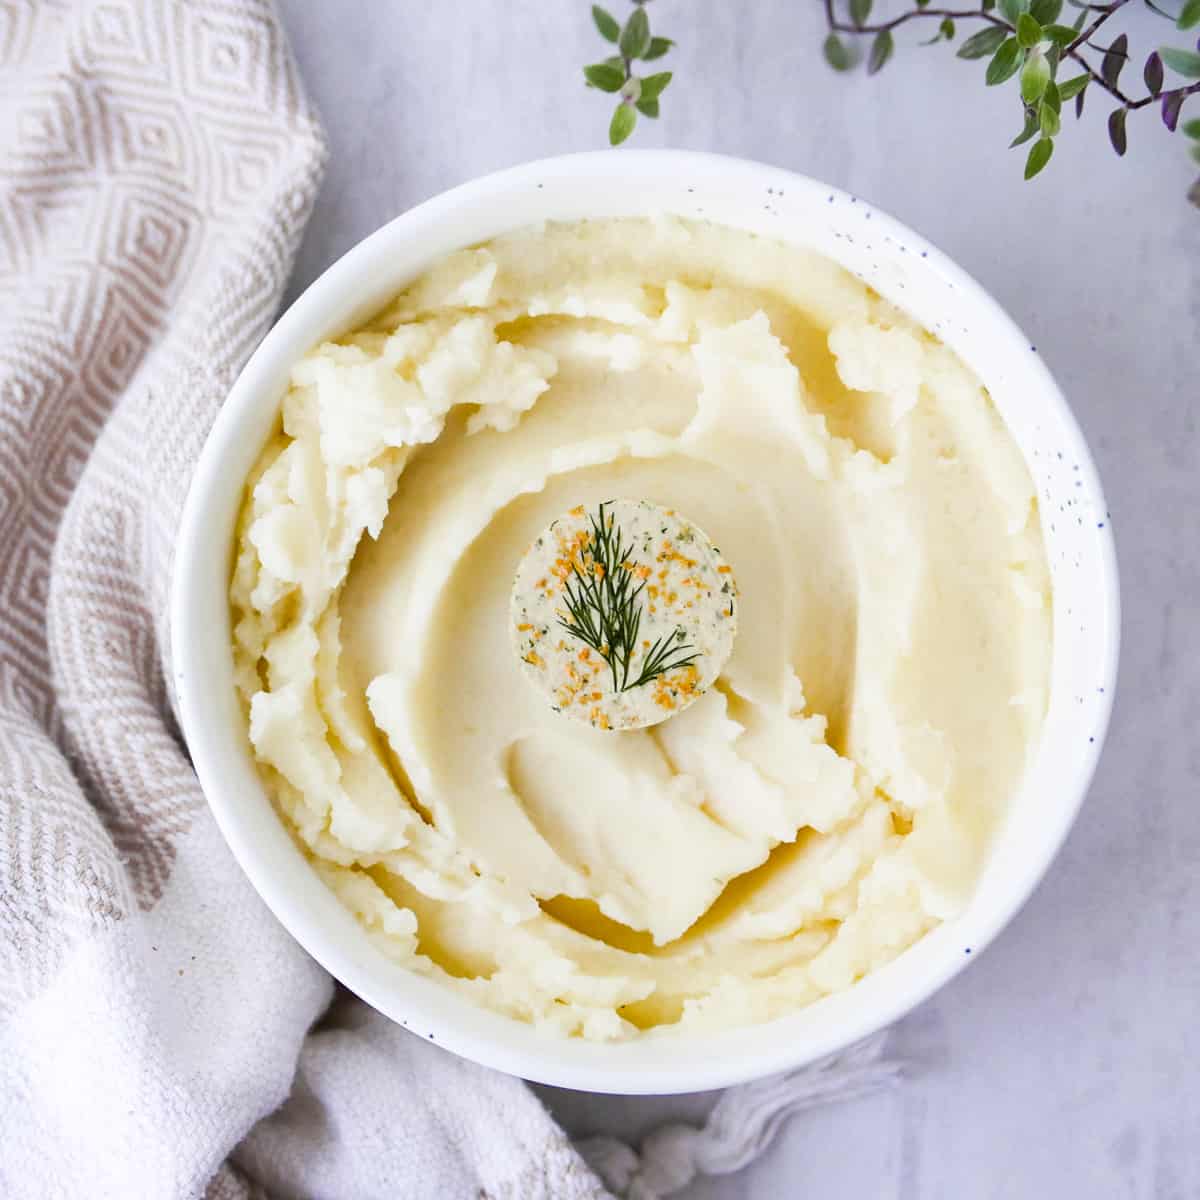 Creamy Instant Pot Mashed Potatoes